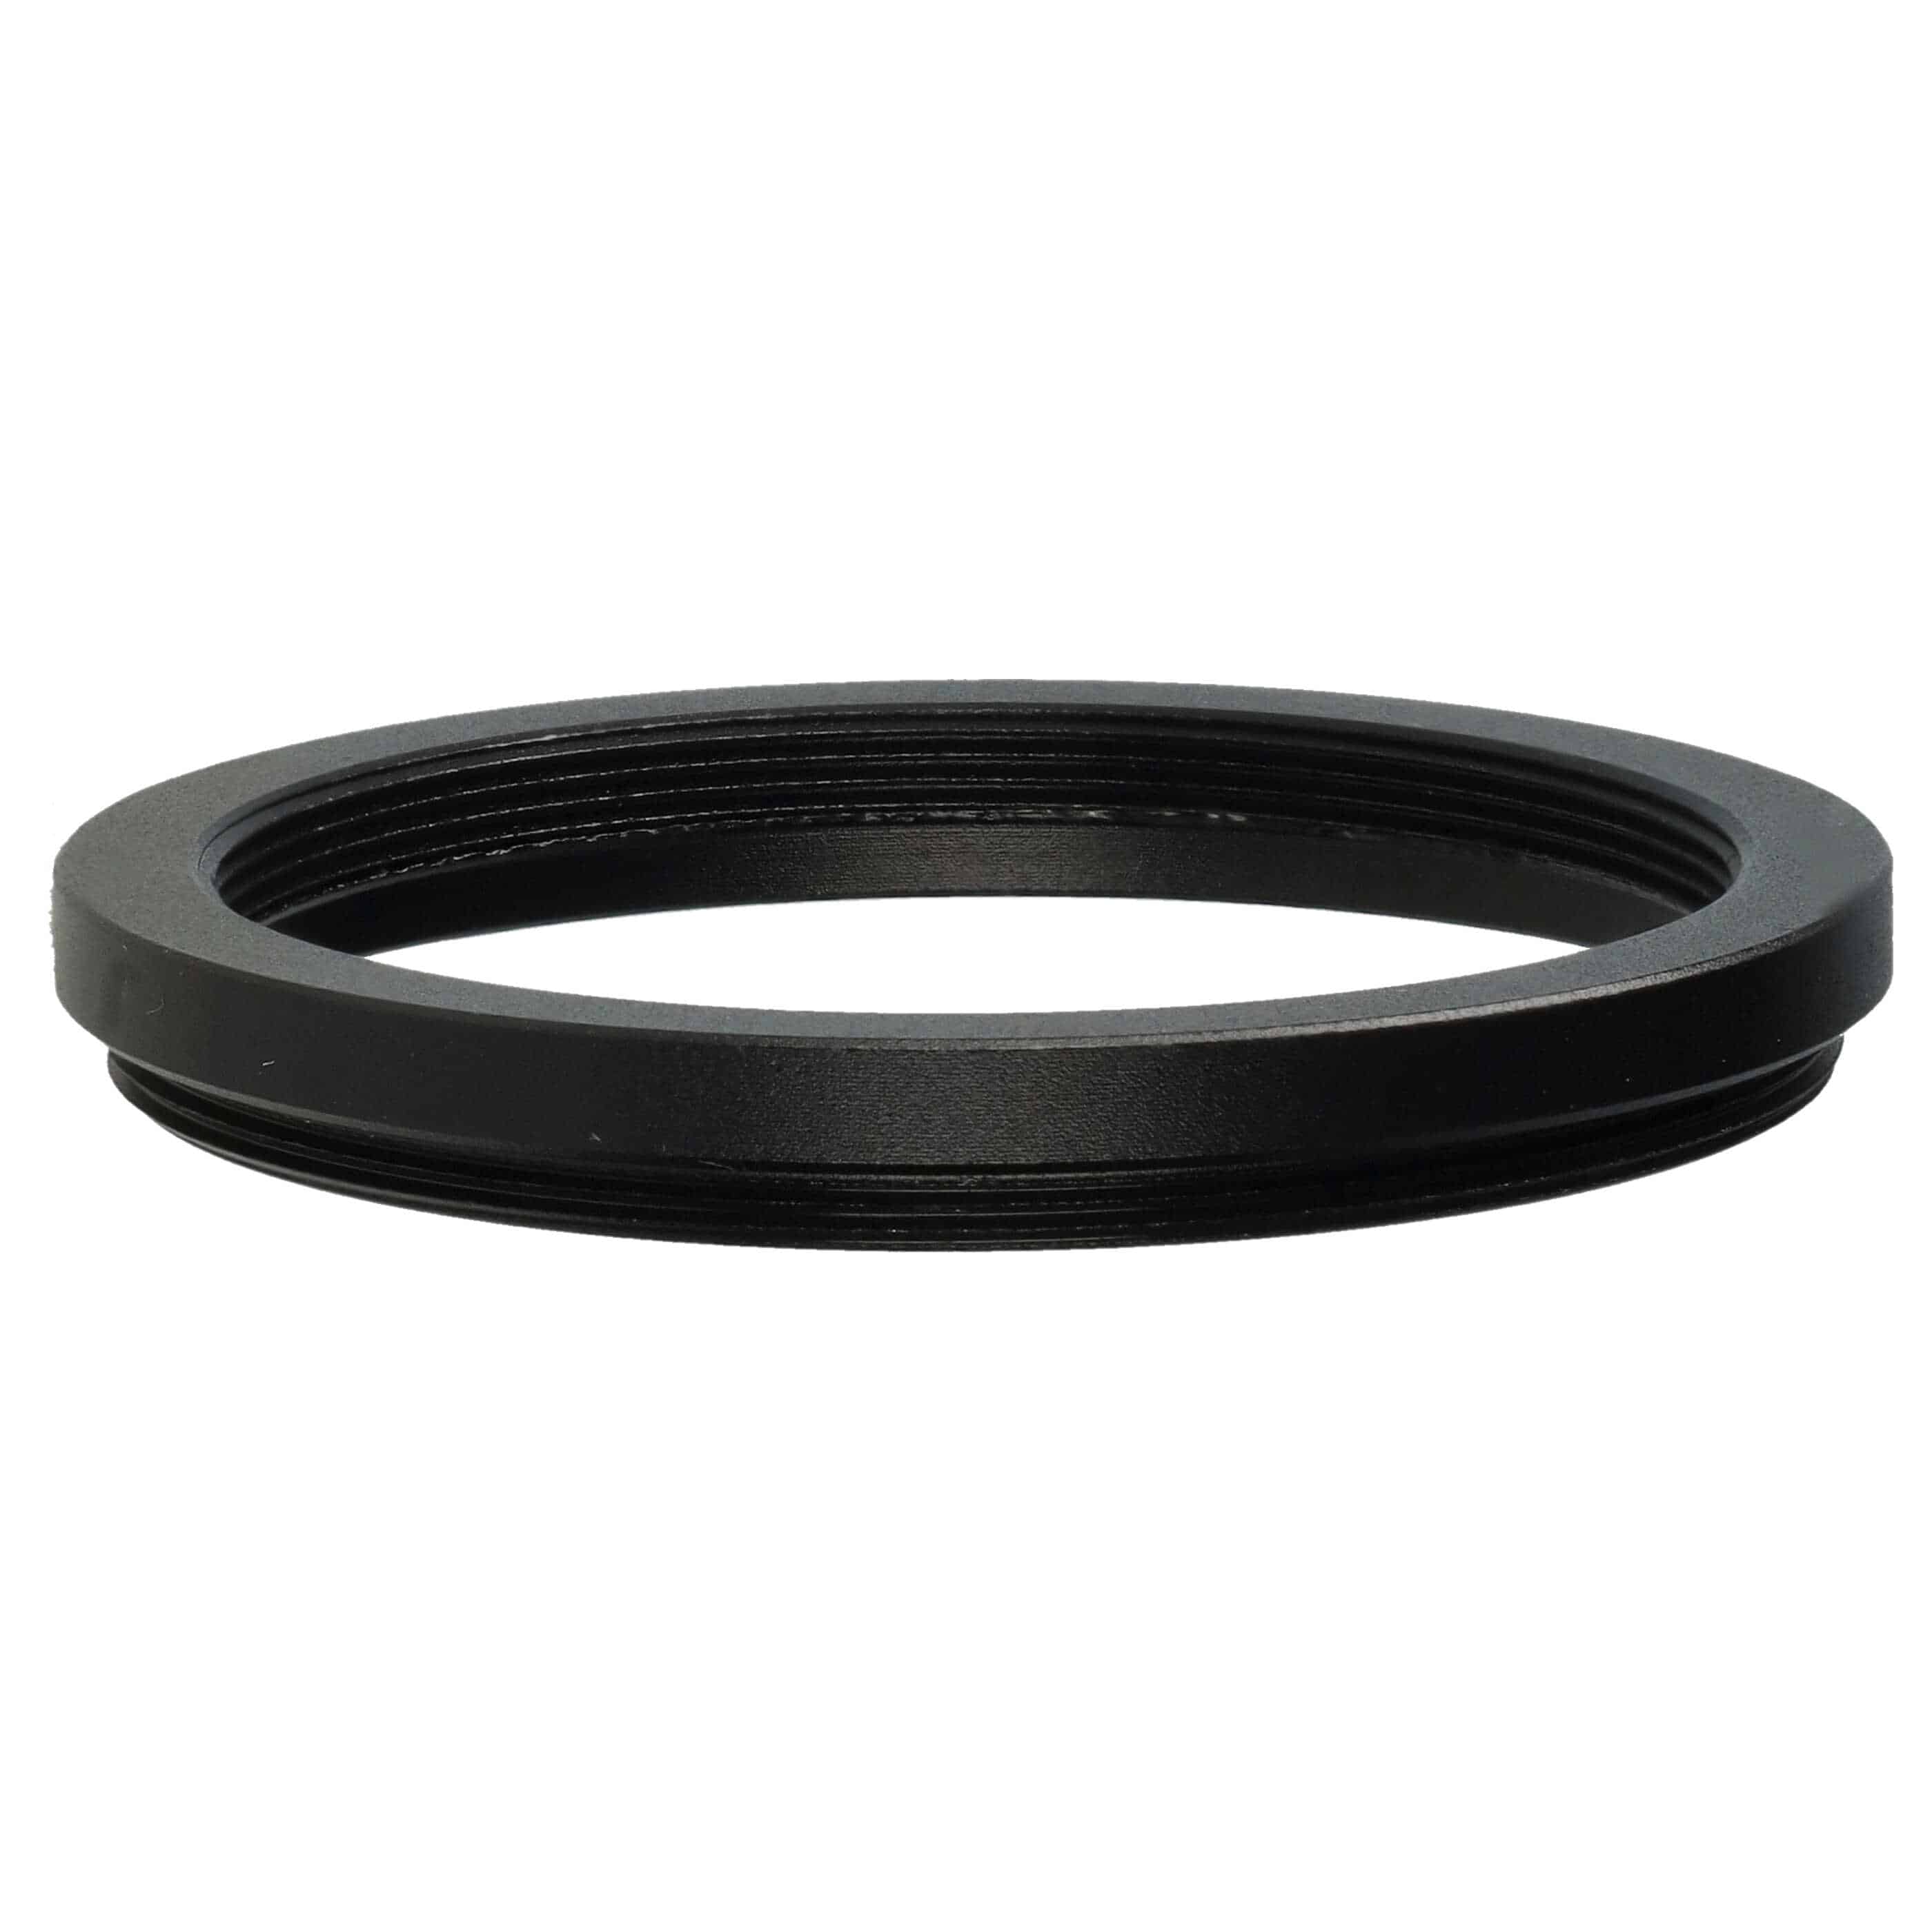 Step-Down Ring Adapter from 49 mm to 43 mm suitable for Camera Lens - Filter Adapter, metal